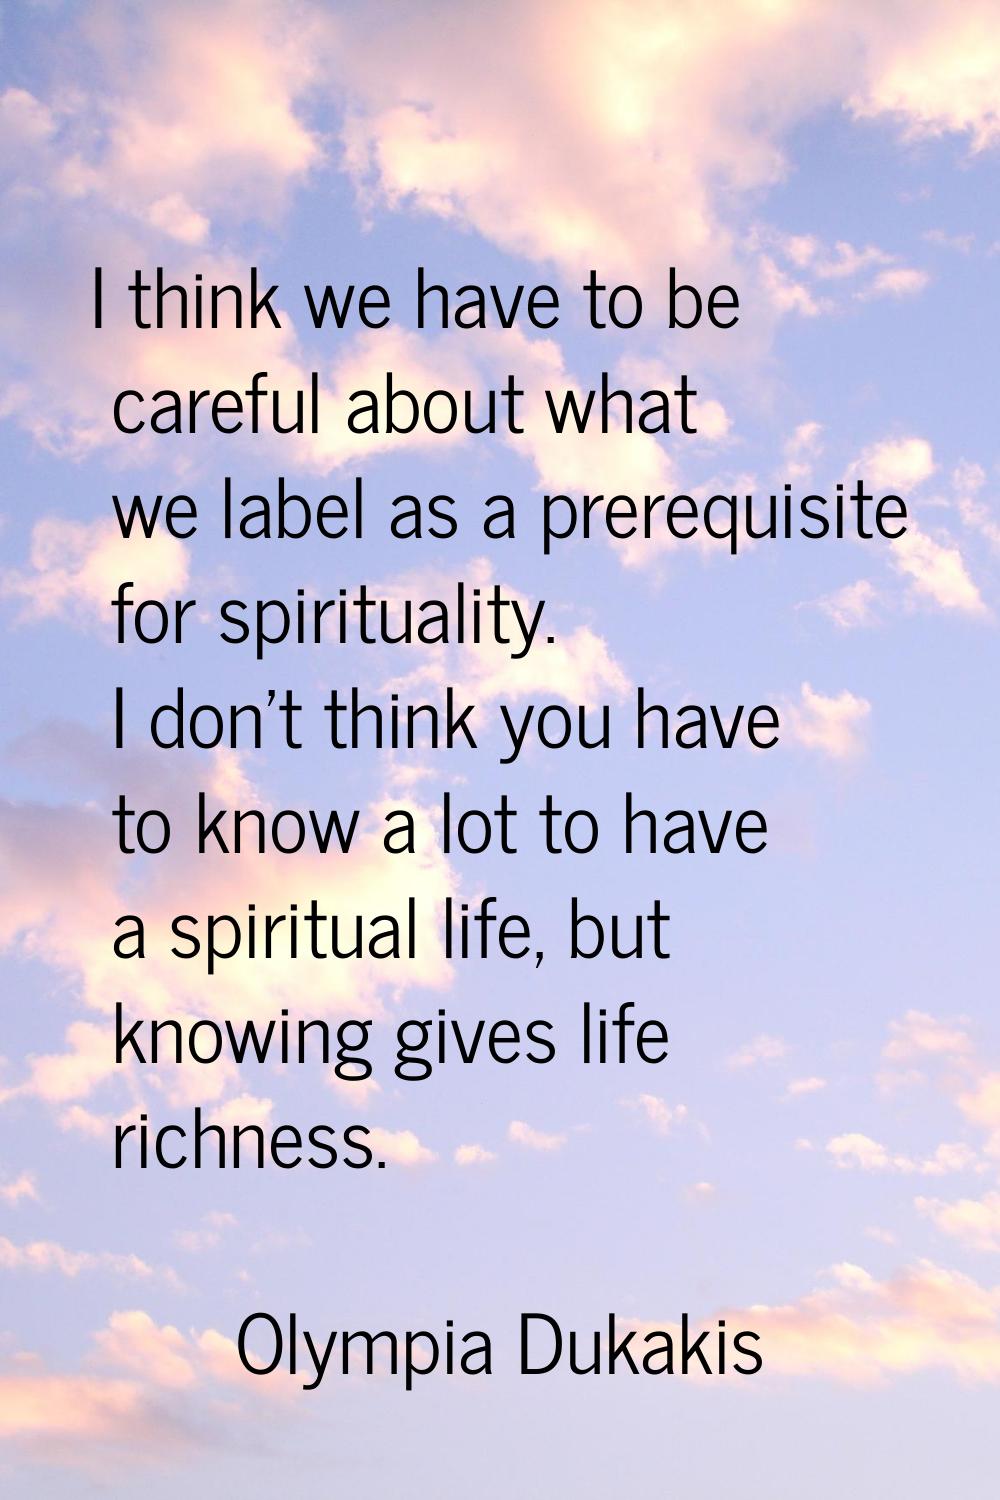 I think we have to be careful about what we label as a prerequisite for spirituality. I don't think